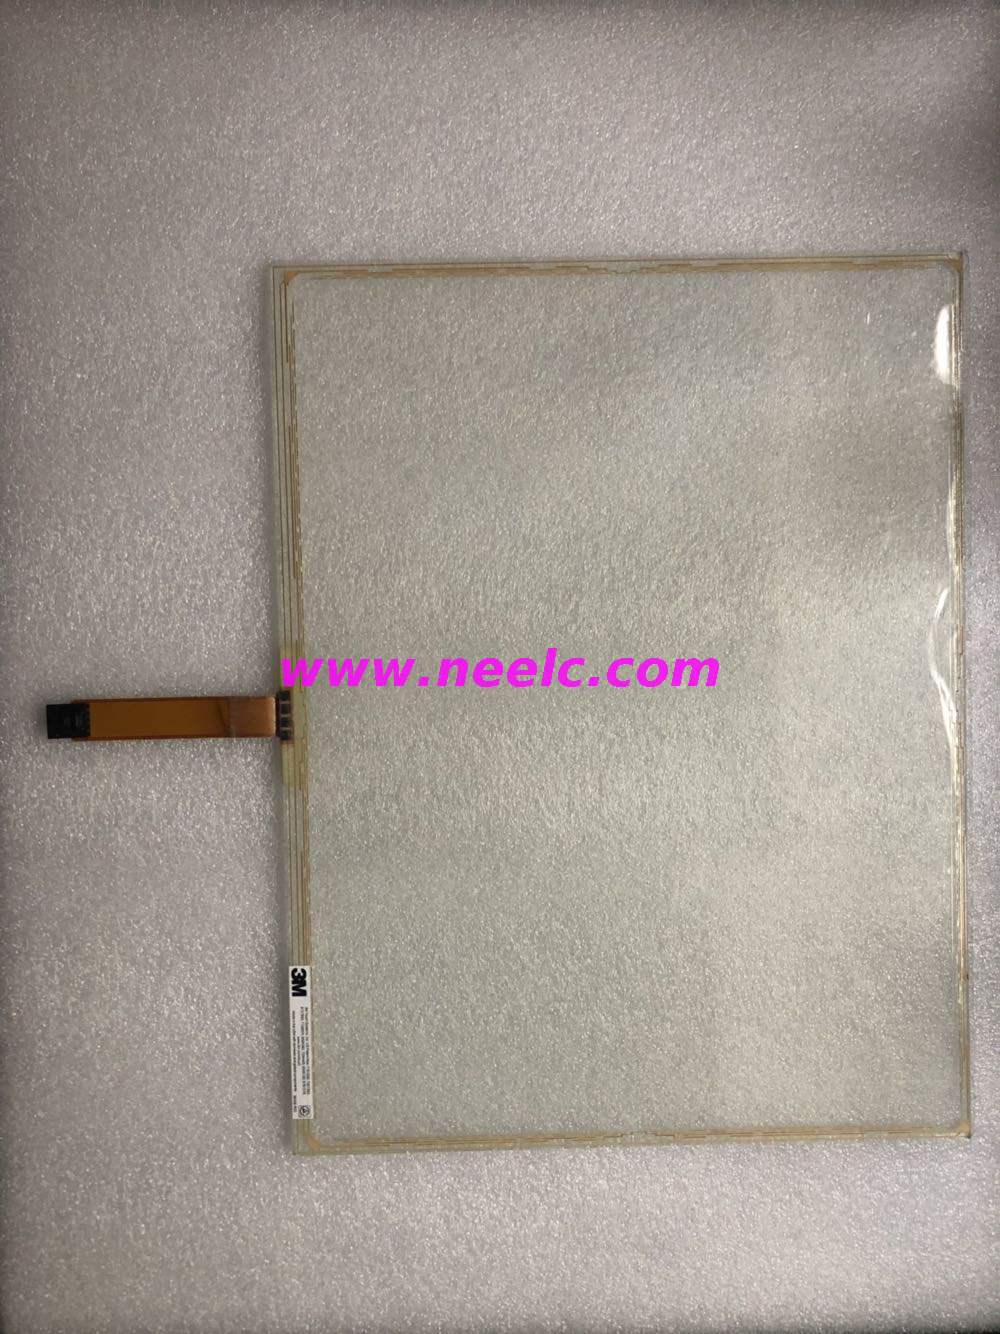 326x257mm 326*257mm 5wire New touch screen